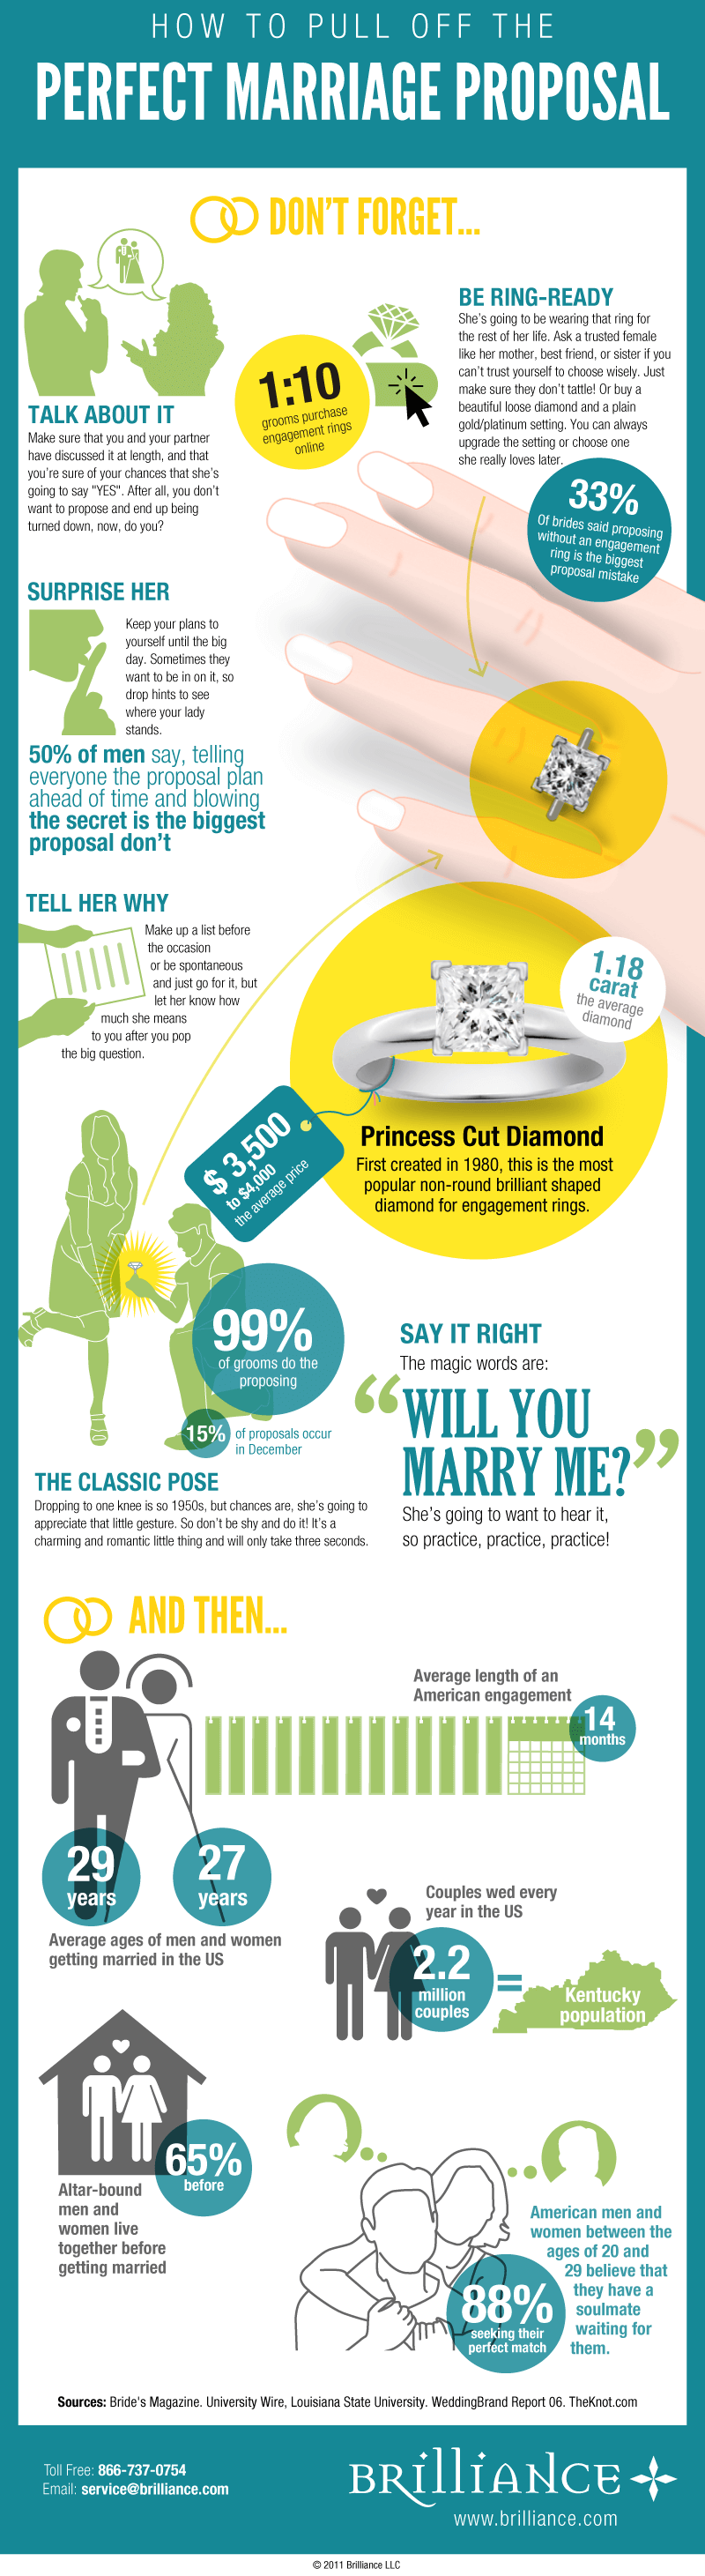 How To Pull Off The Perfect Marriage Proposal | Visual.ly